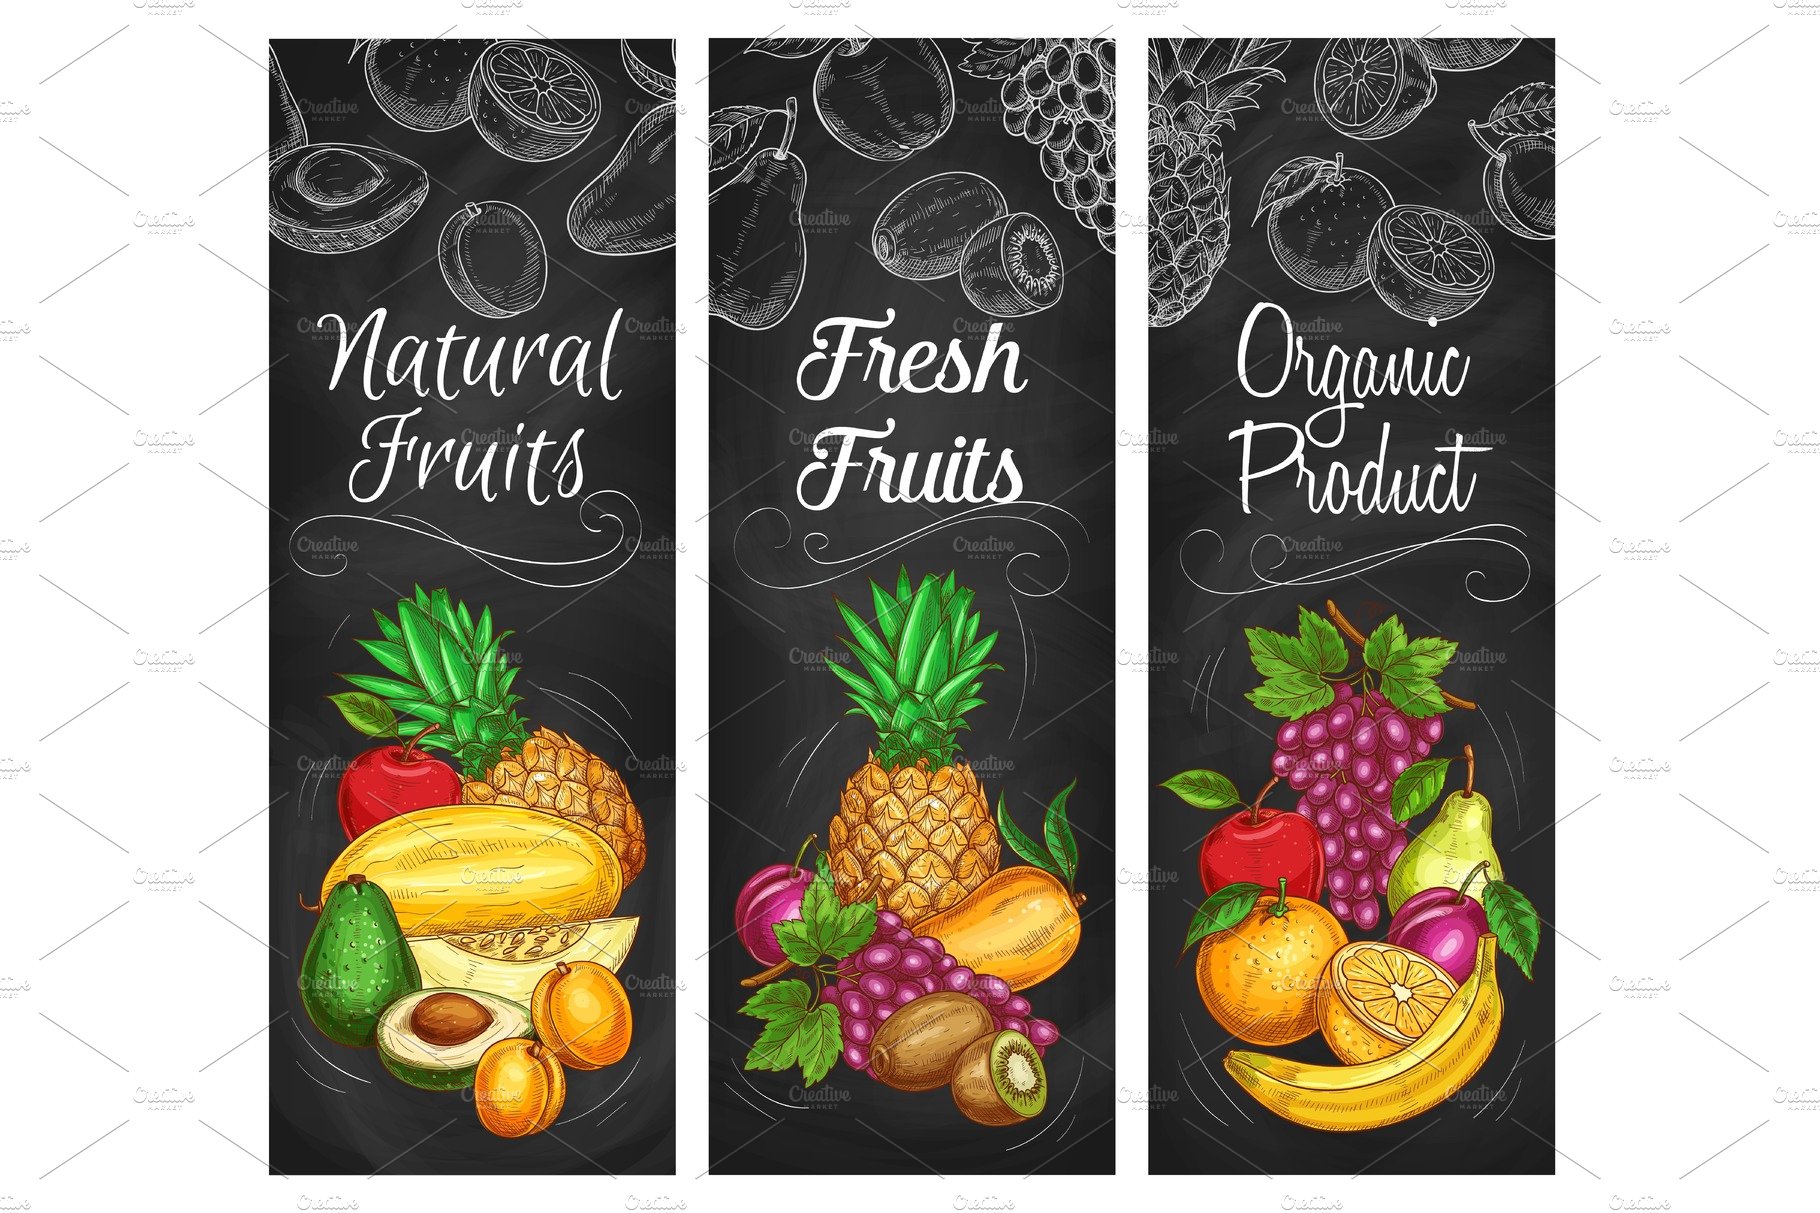 Garden and tropic fruits cover image.